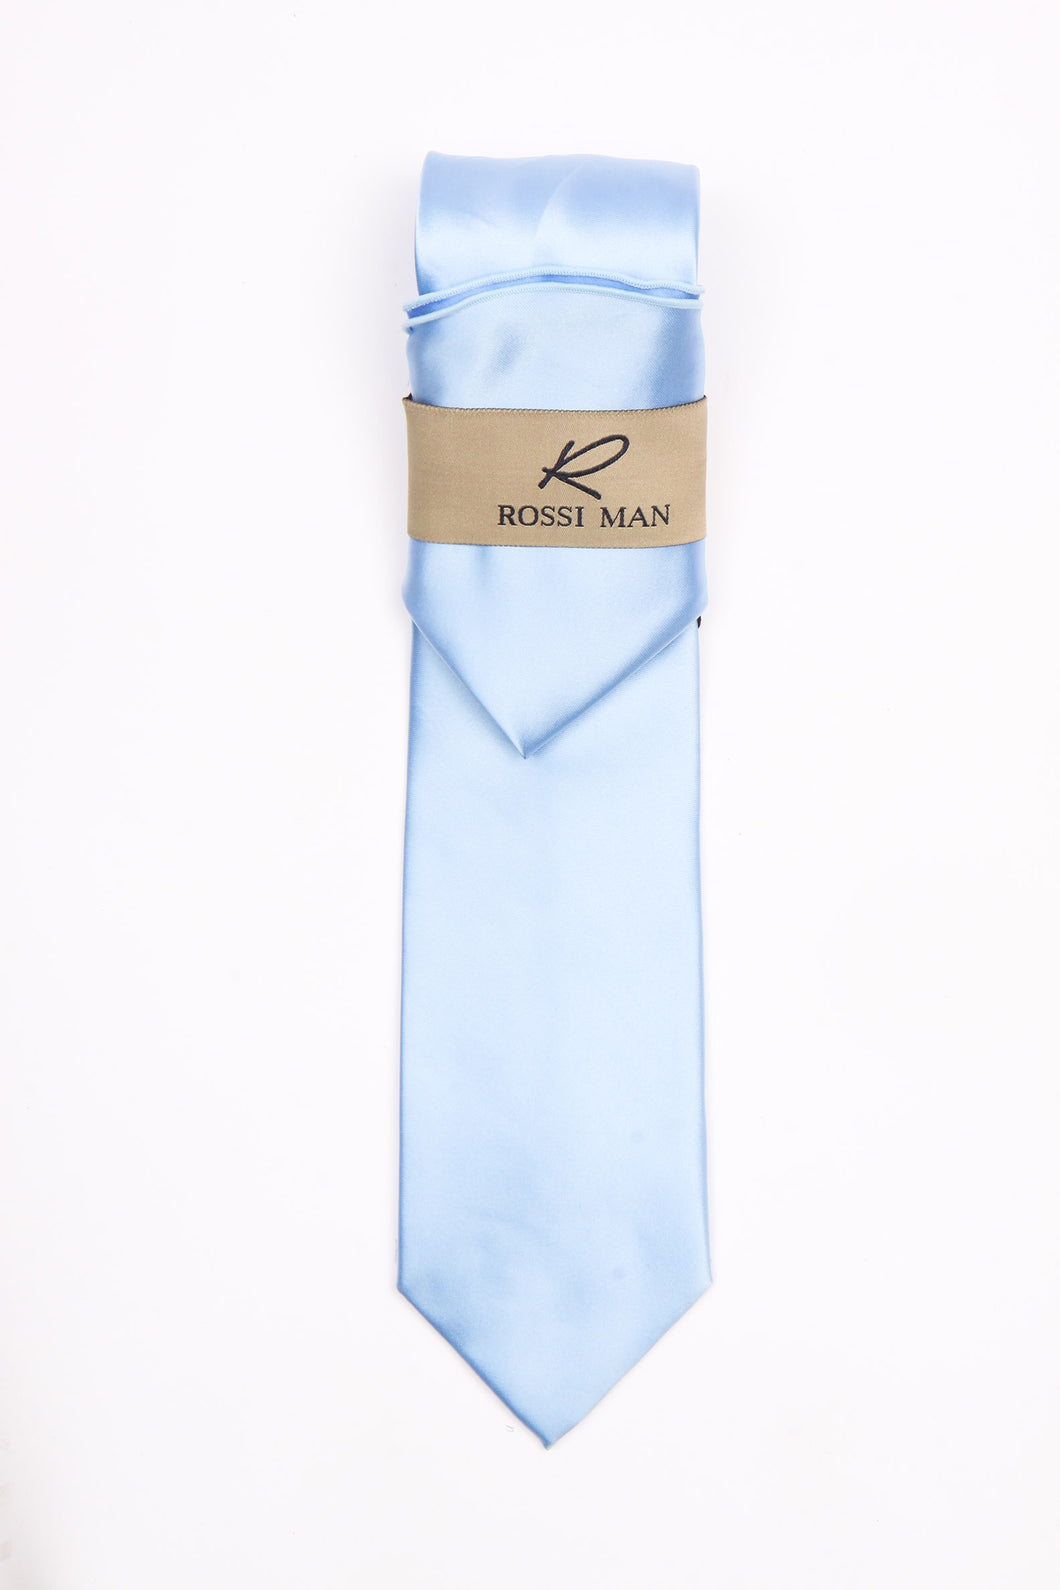 Rossi Man Tie and Pocket Round - RMR665-7